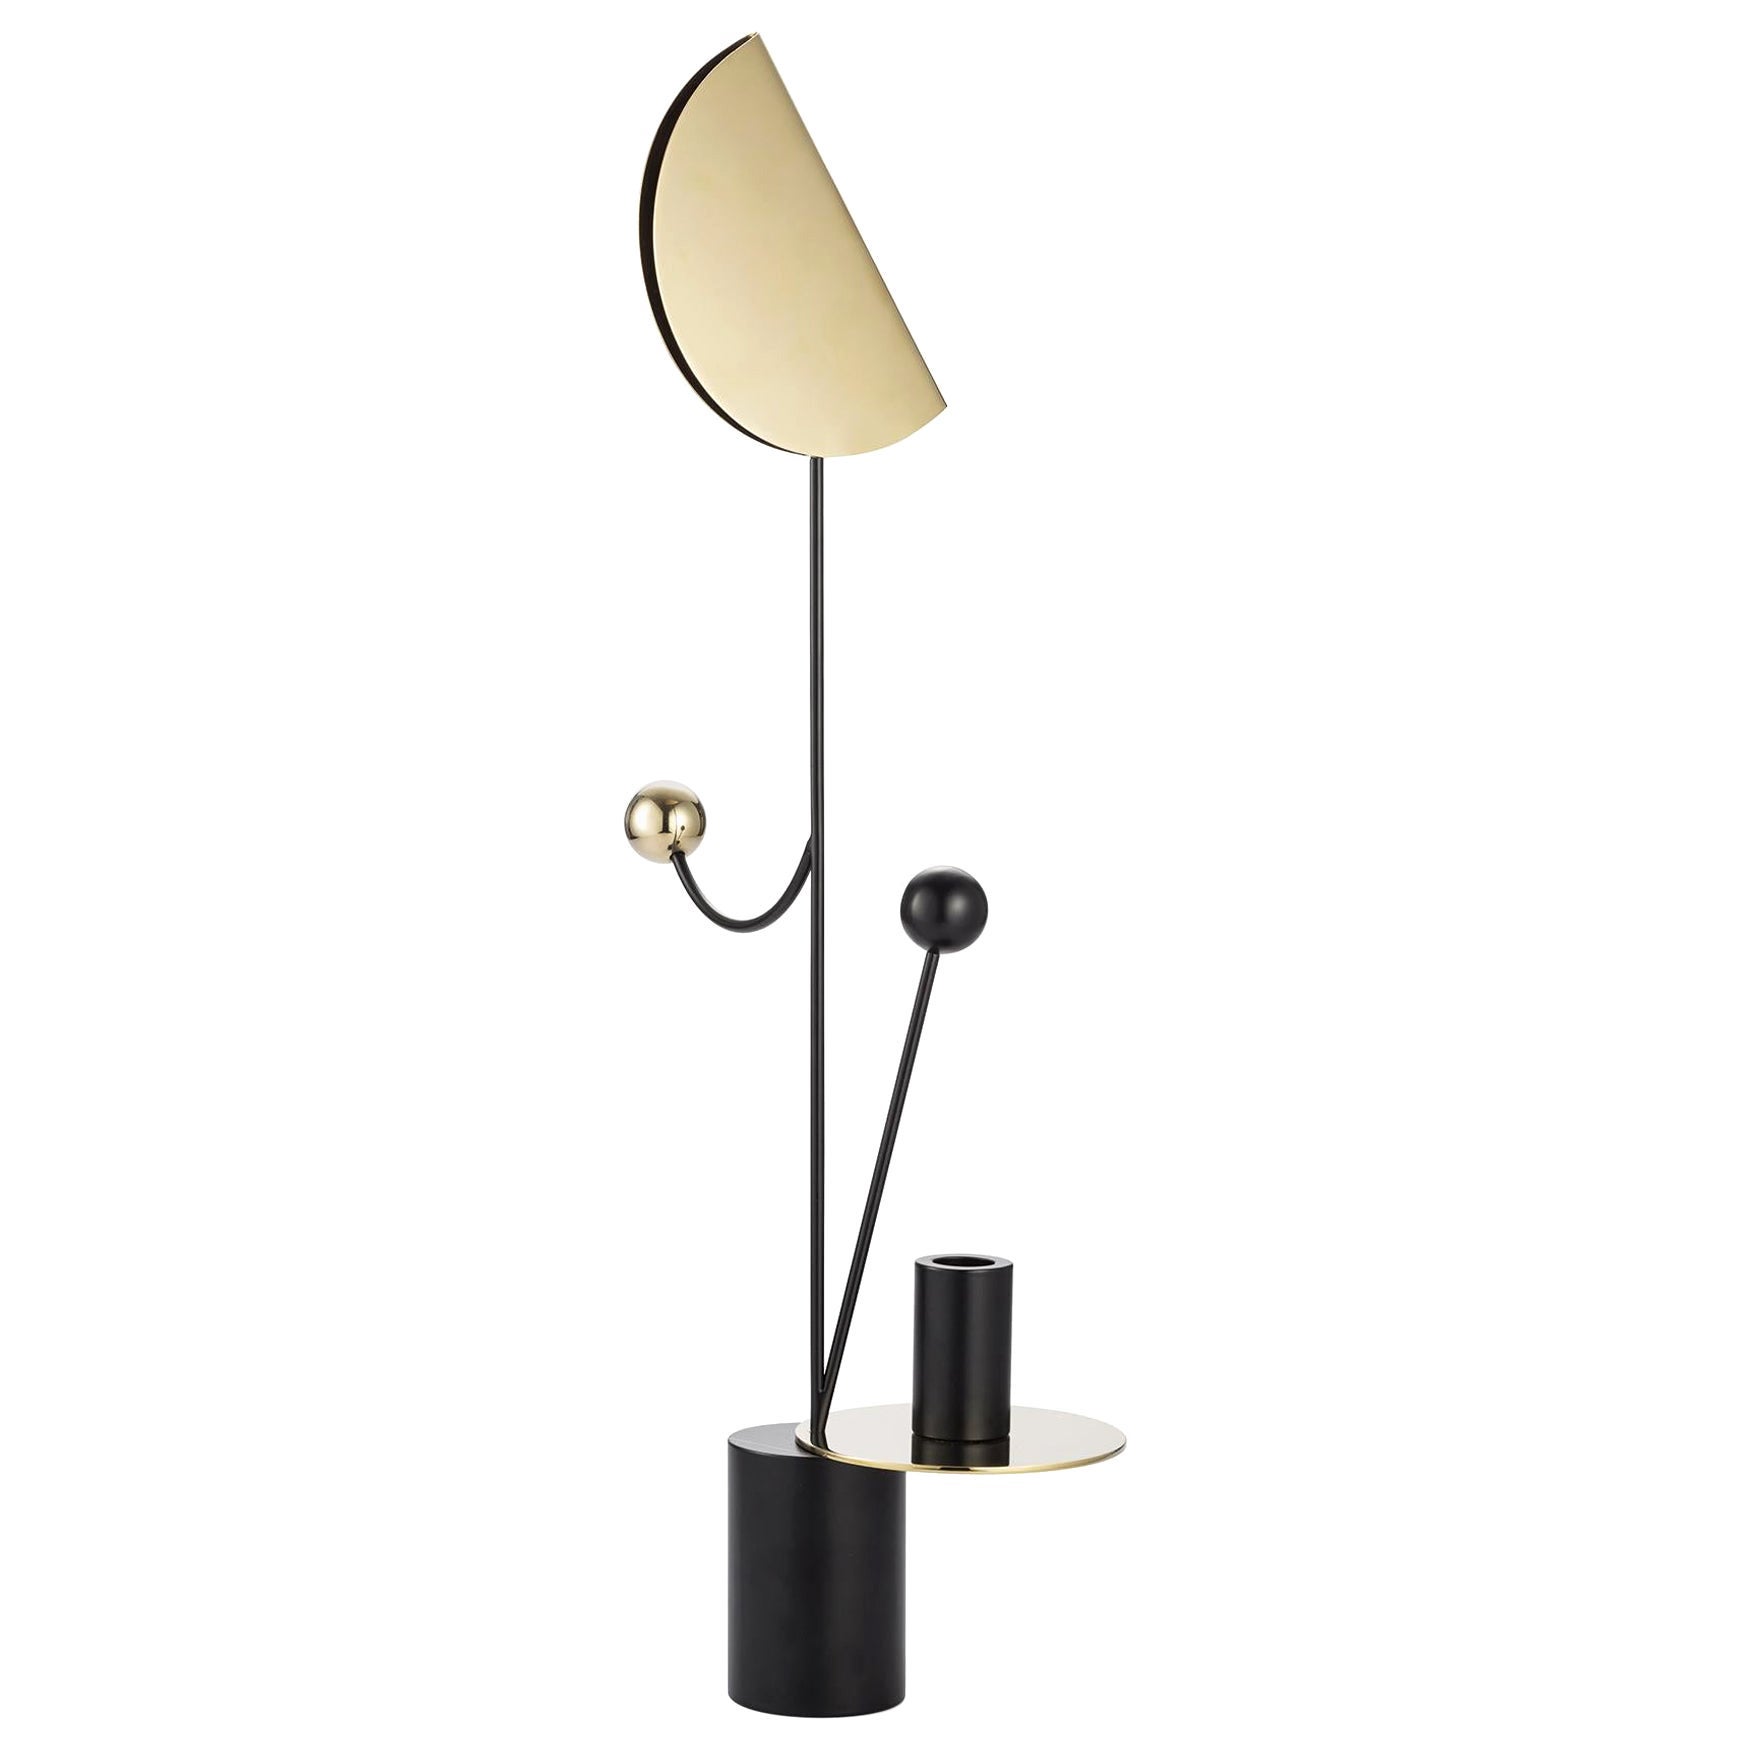 Les Immobiles N°2 Candleholder by Thomas Dariel For Sale